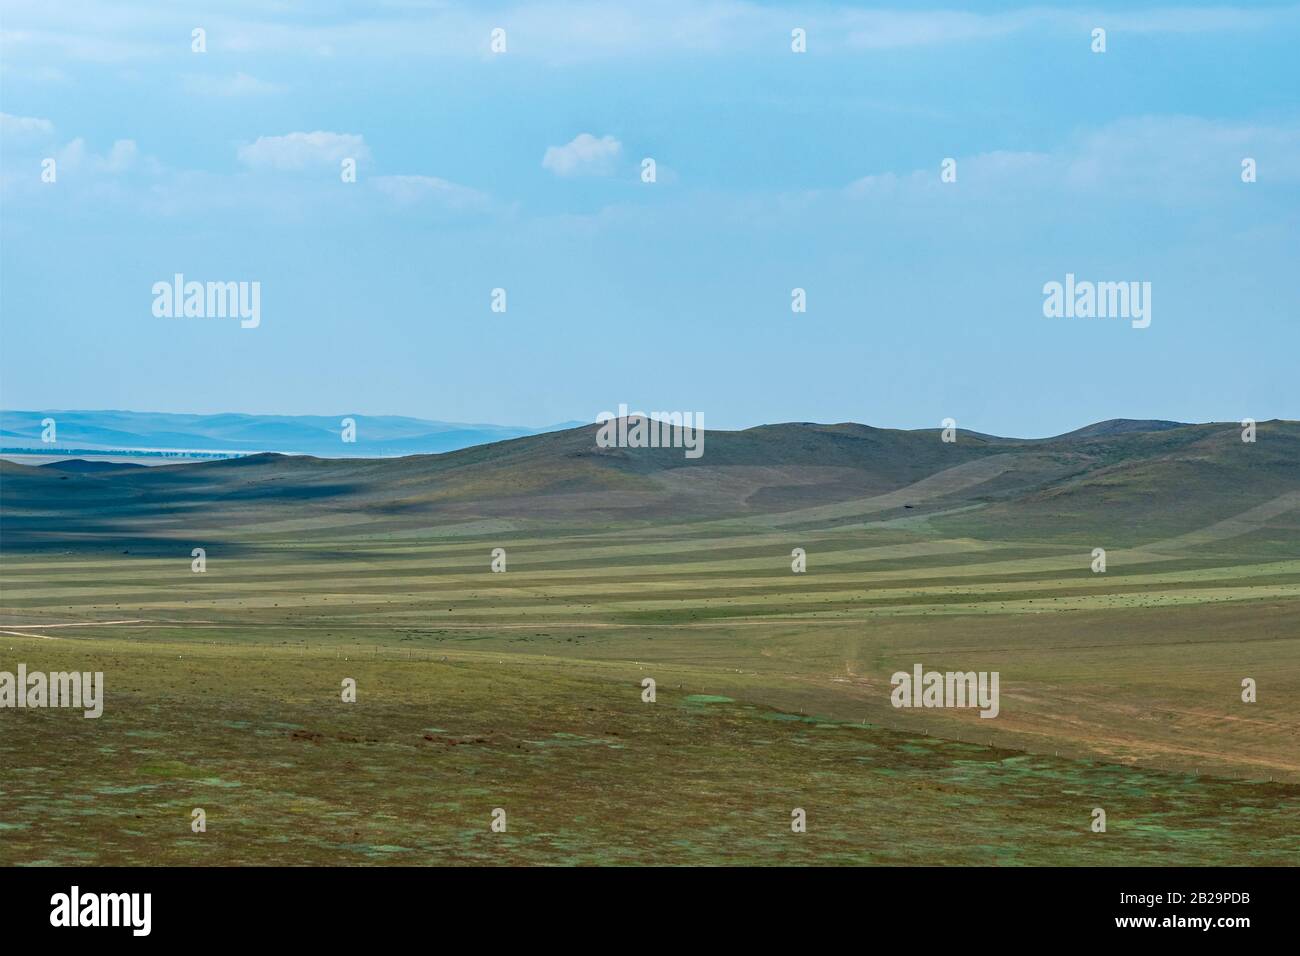 Steppe with green rolling hills, Taipusi Banner, Inner Mongolia, China Stock Photo